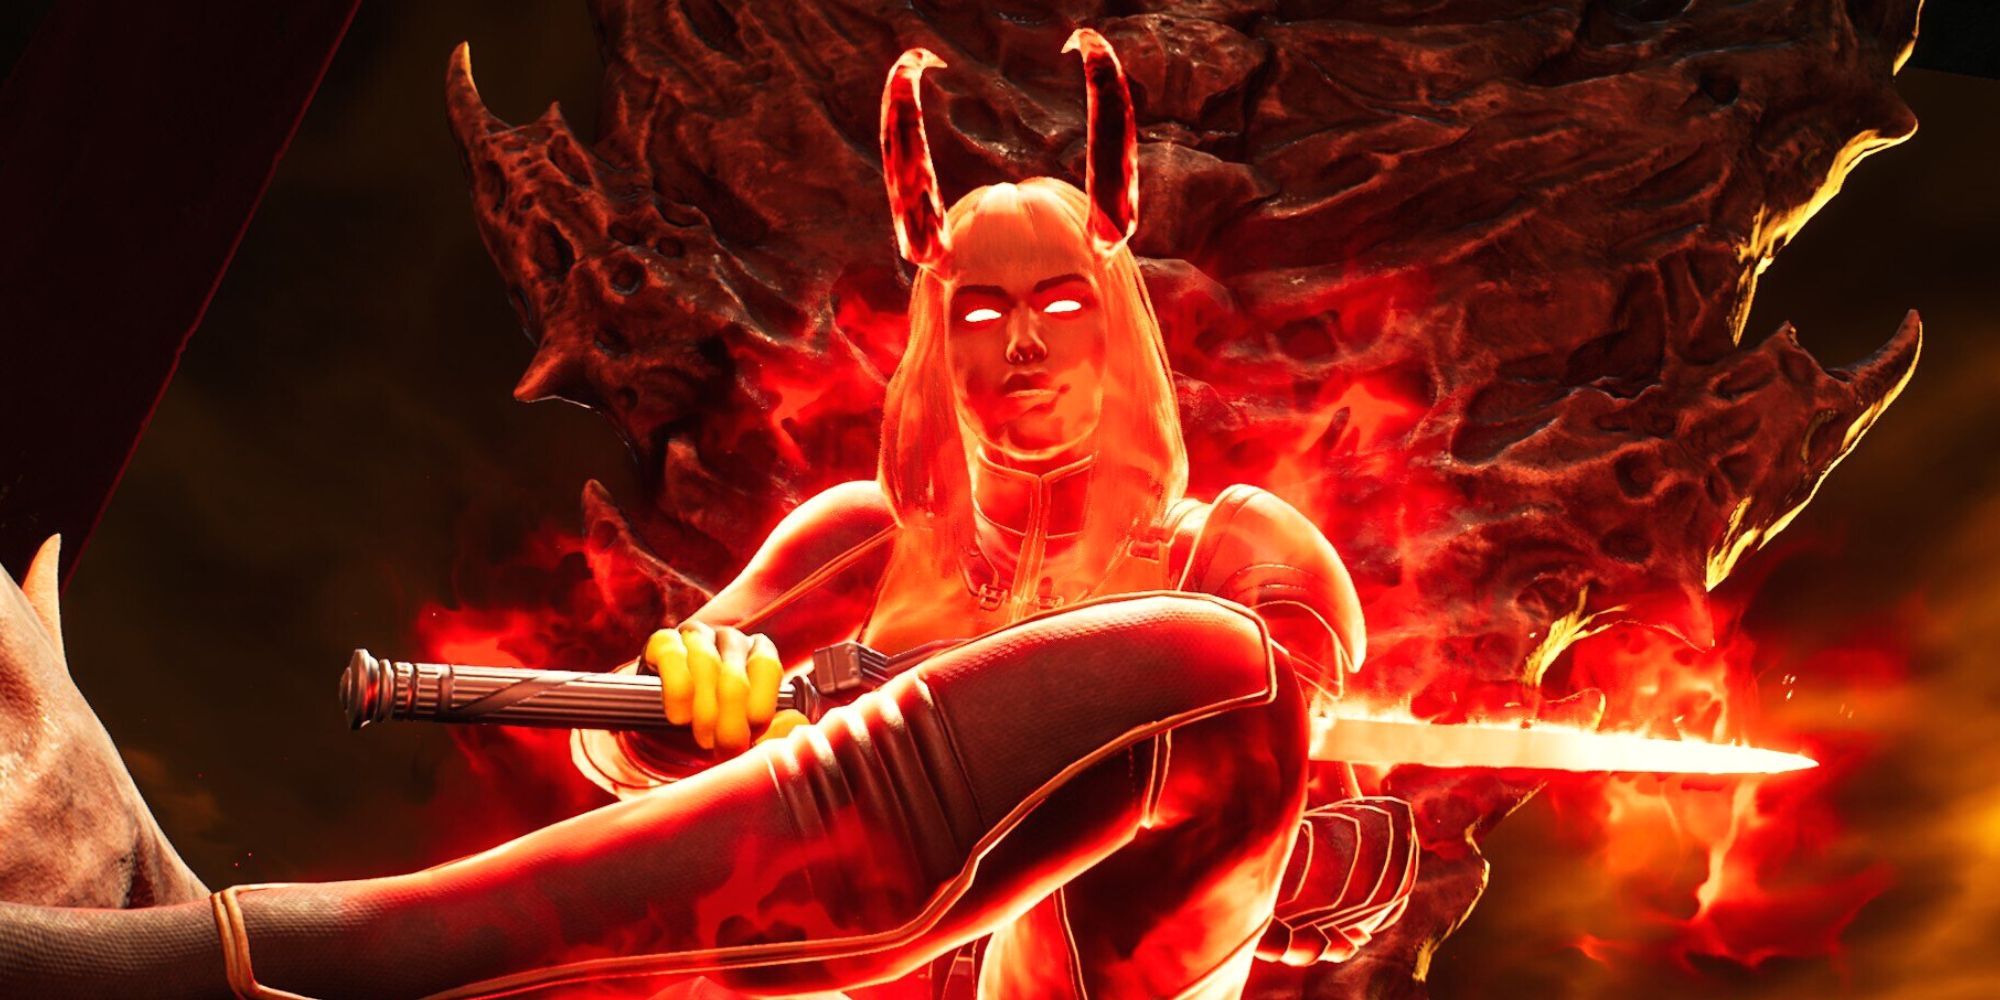 Magik sitting on the throne of Limbo, with glowing red horns and glowing red eyes.